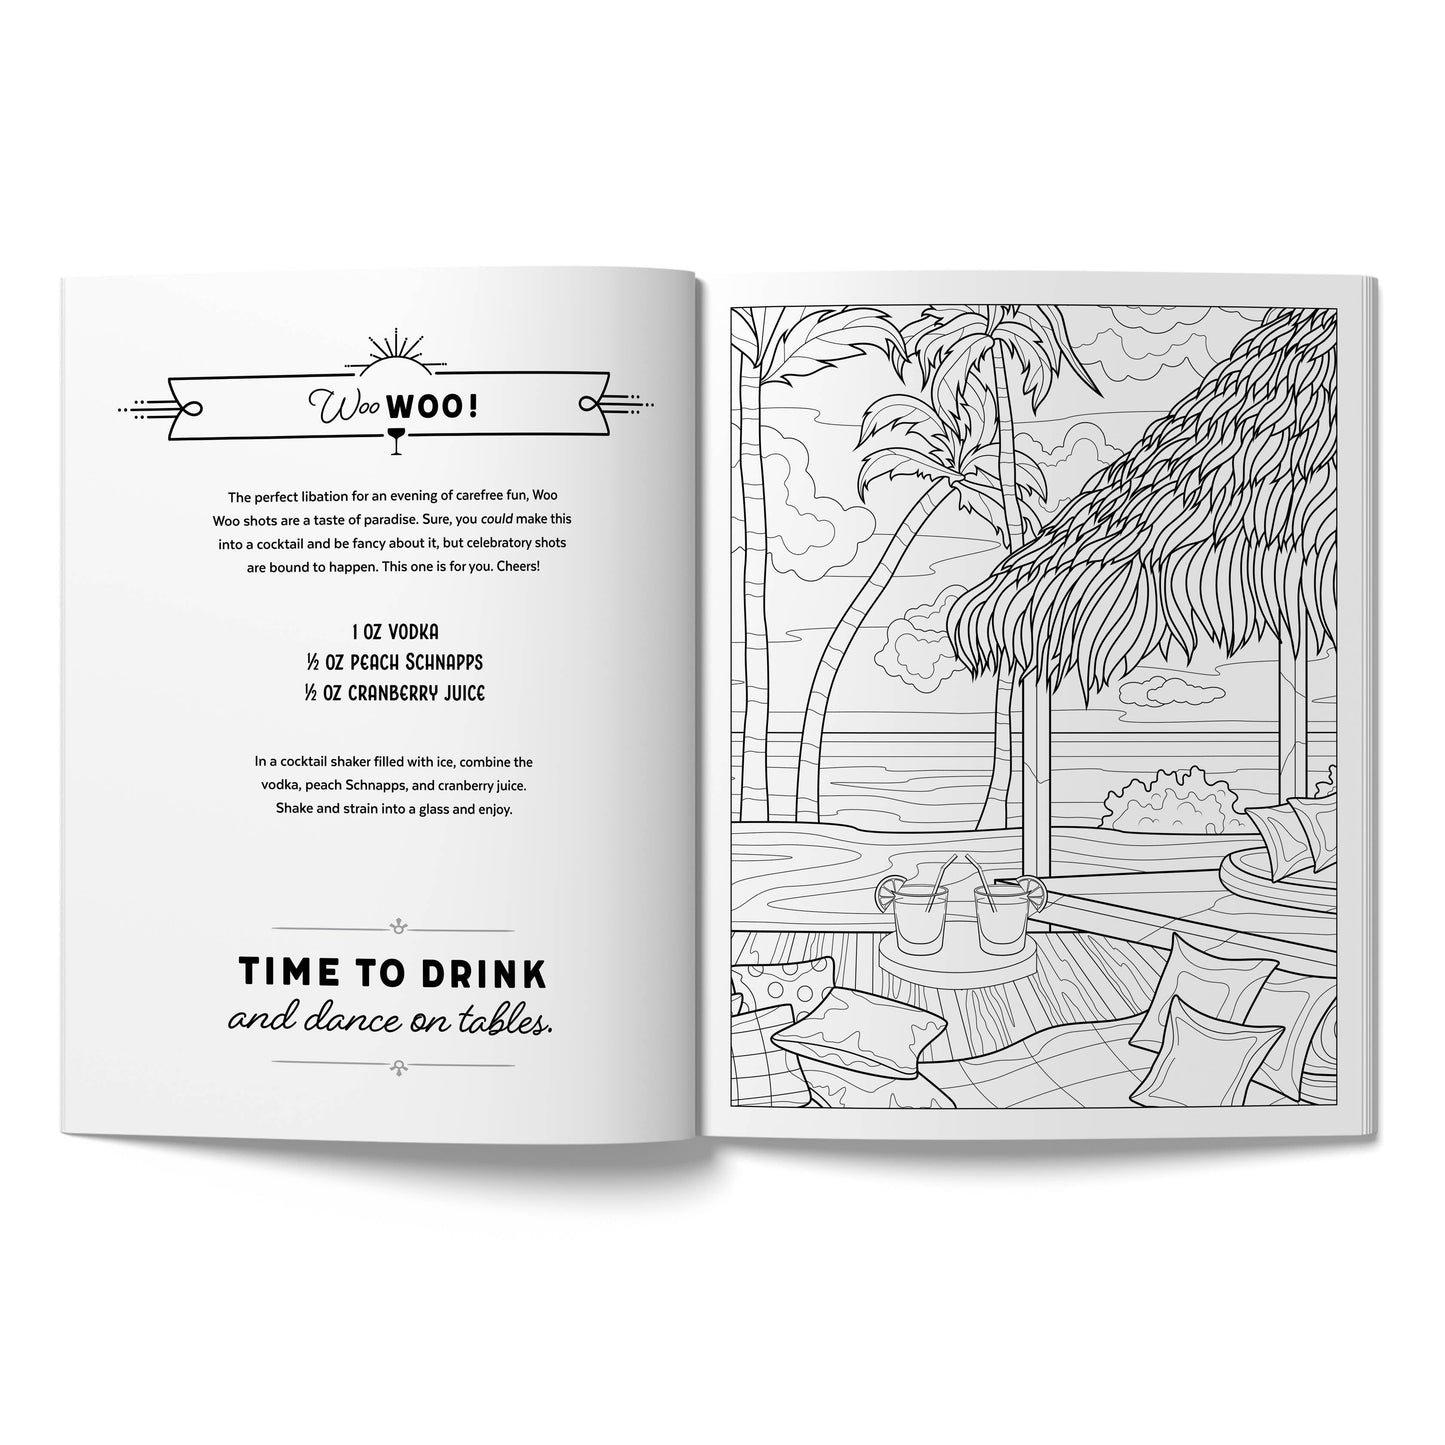 The Creative Drinker Coloring Book